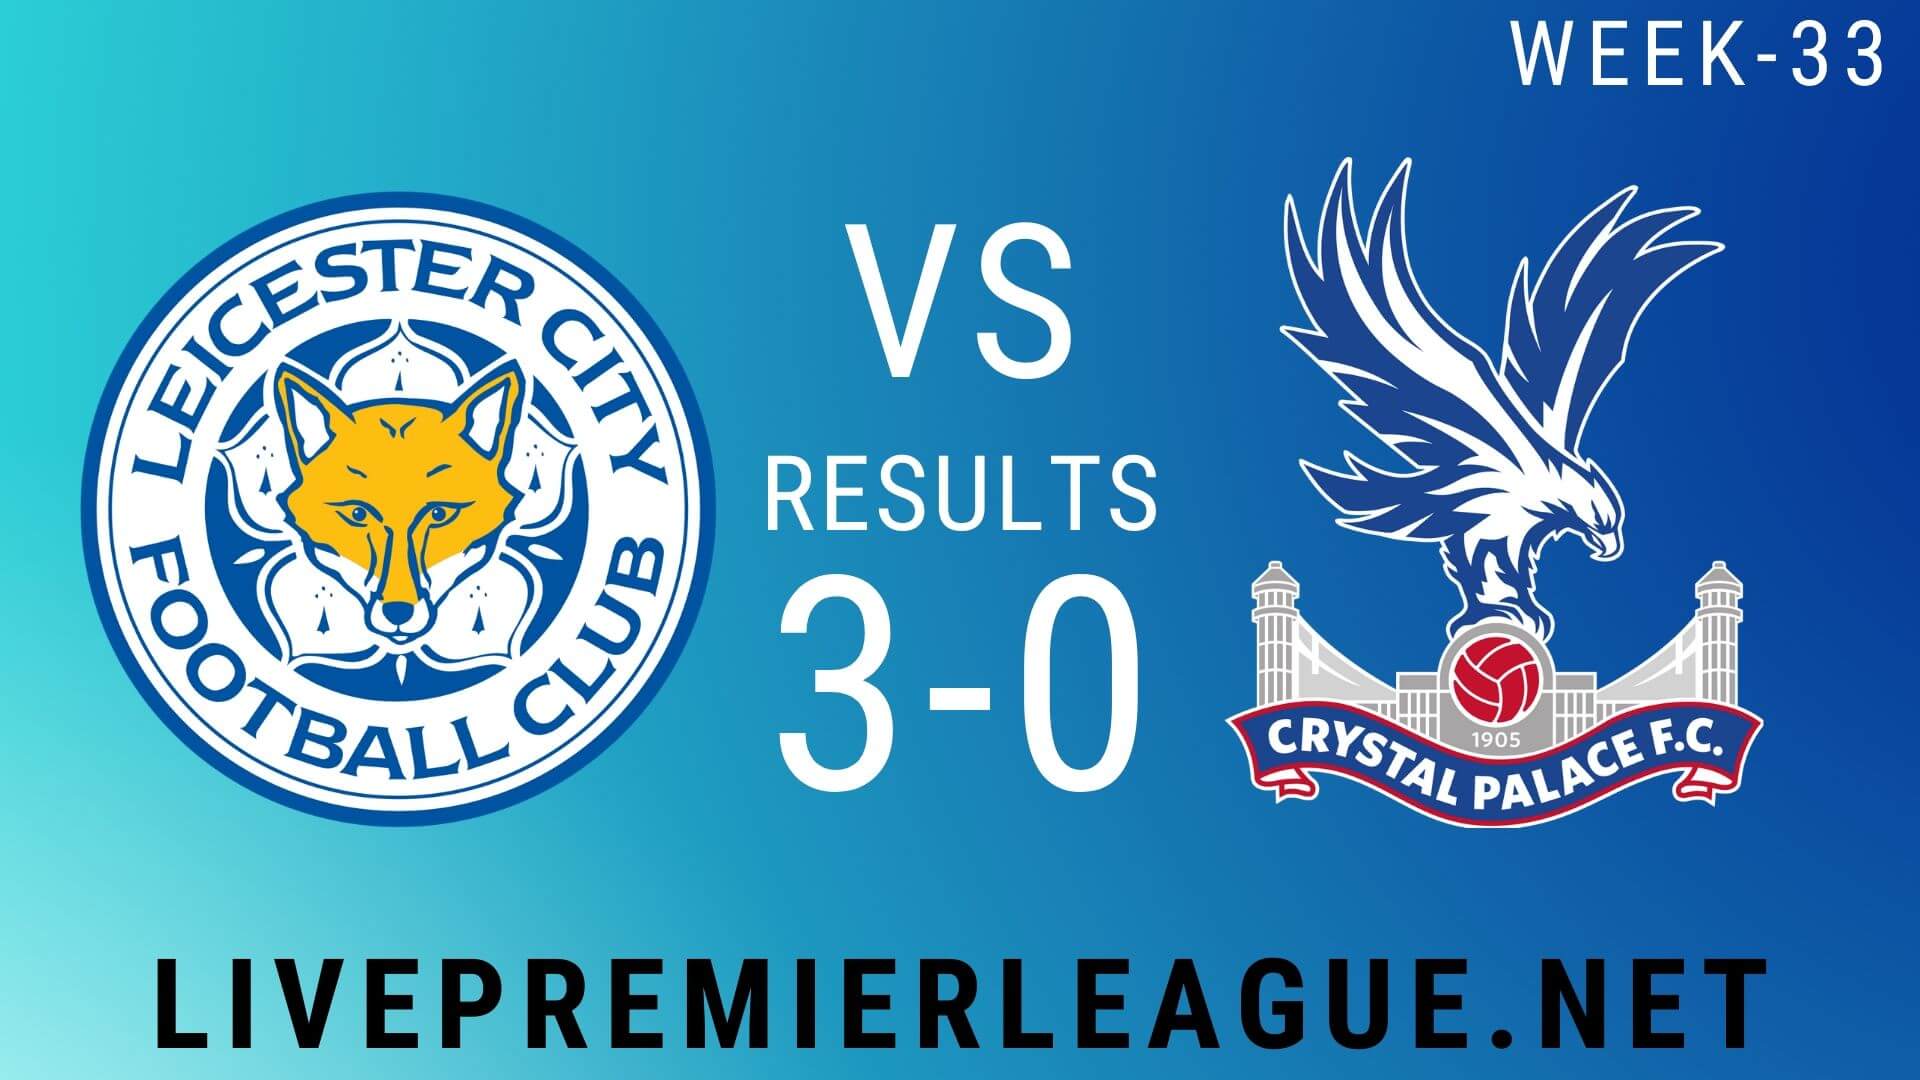 Leicester City Vs Crystal Palace | Week 33 Result 2020